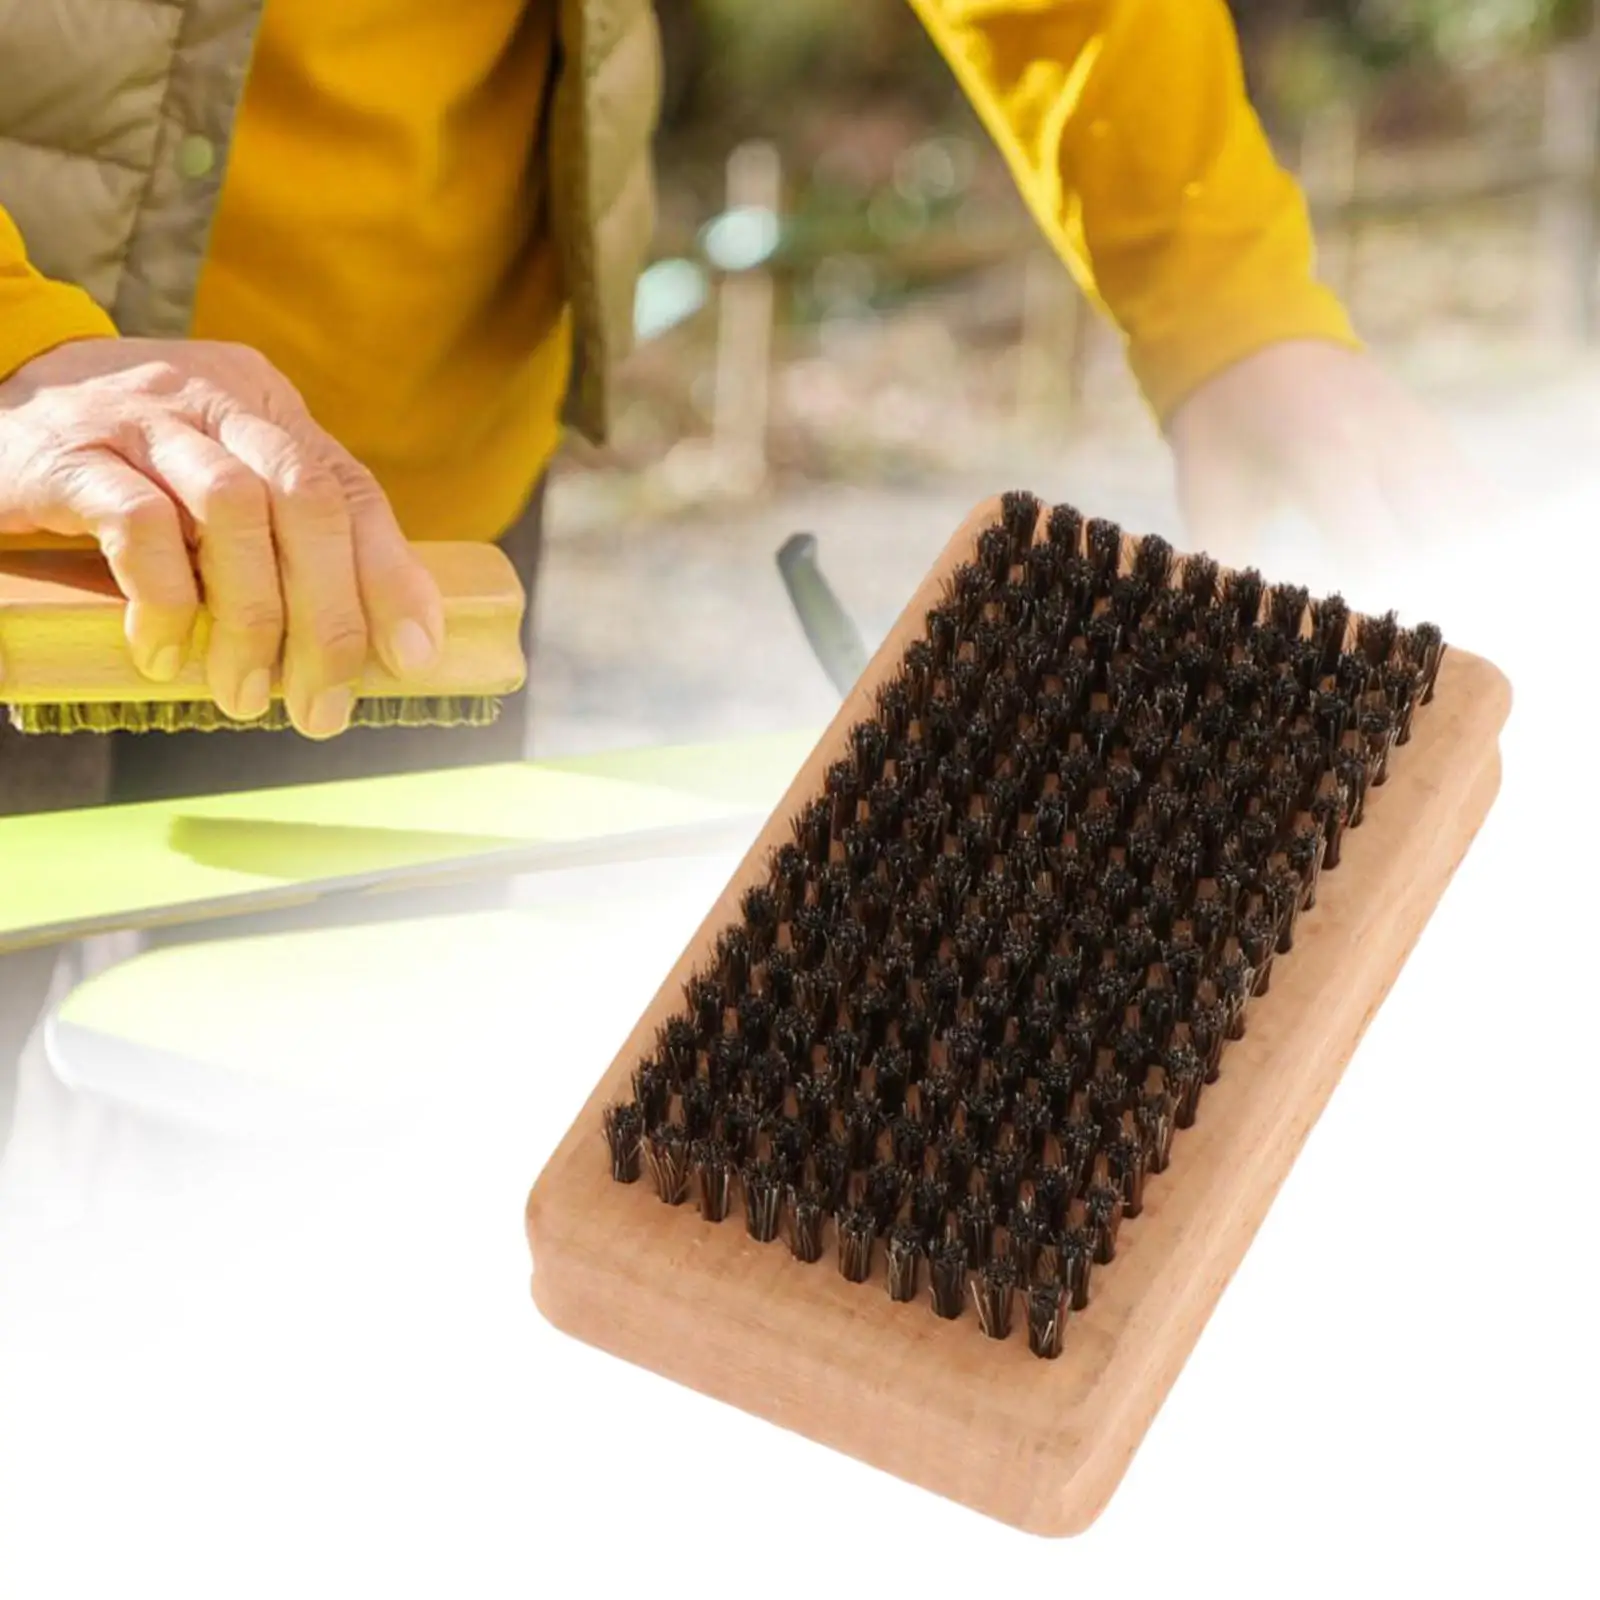 Snowboard Wax Brush Ski Brush Removing Wax Portable Durable Convenient Cleaning Brush Ski Waxing Brush for Traveling Outdoor